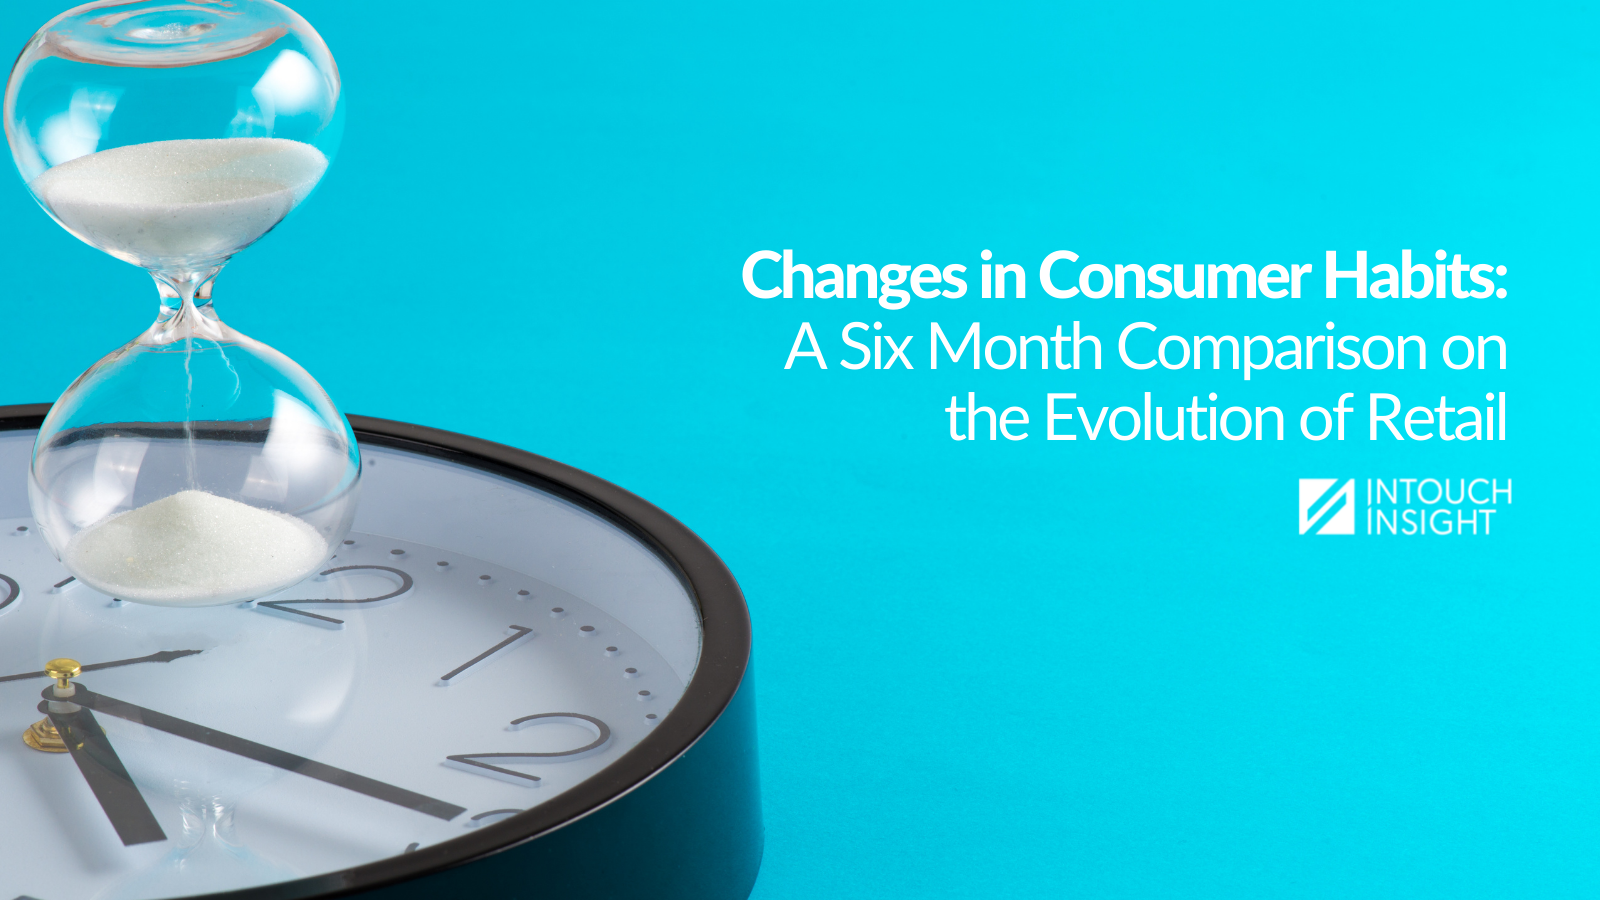 Intouch Insight | Changes In Consumer Habits Study Oct 2020 v2